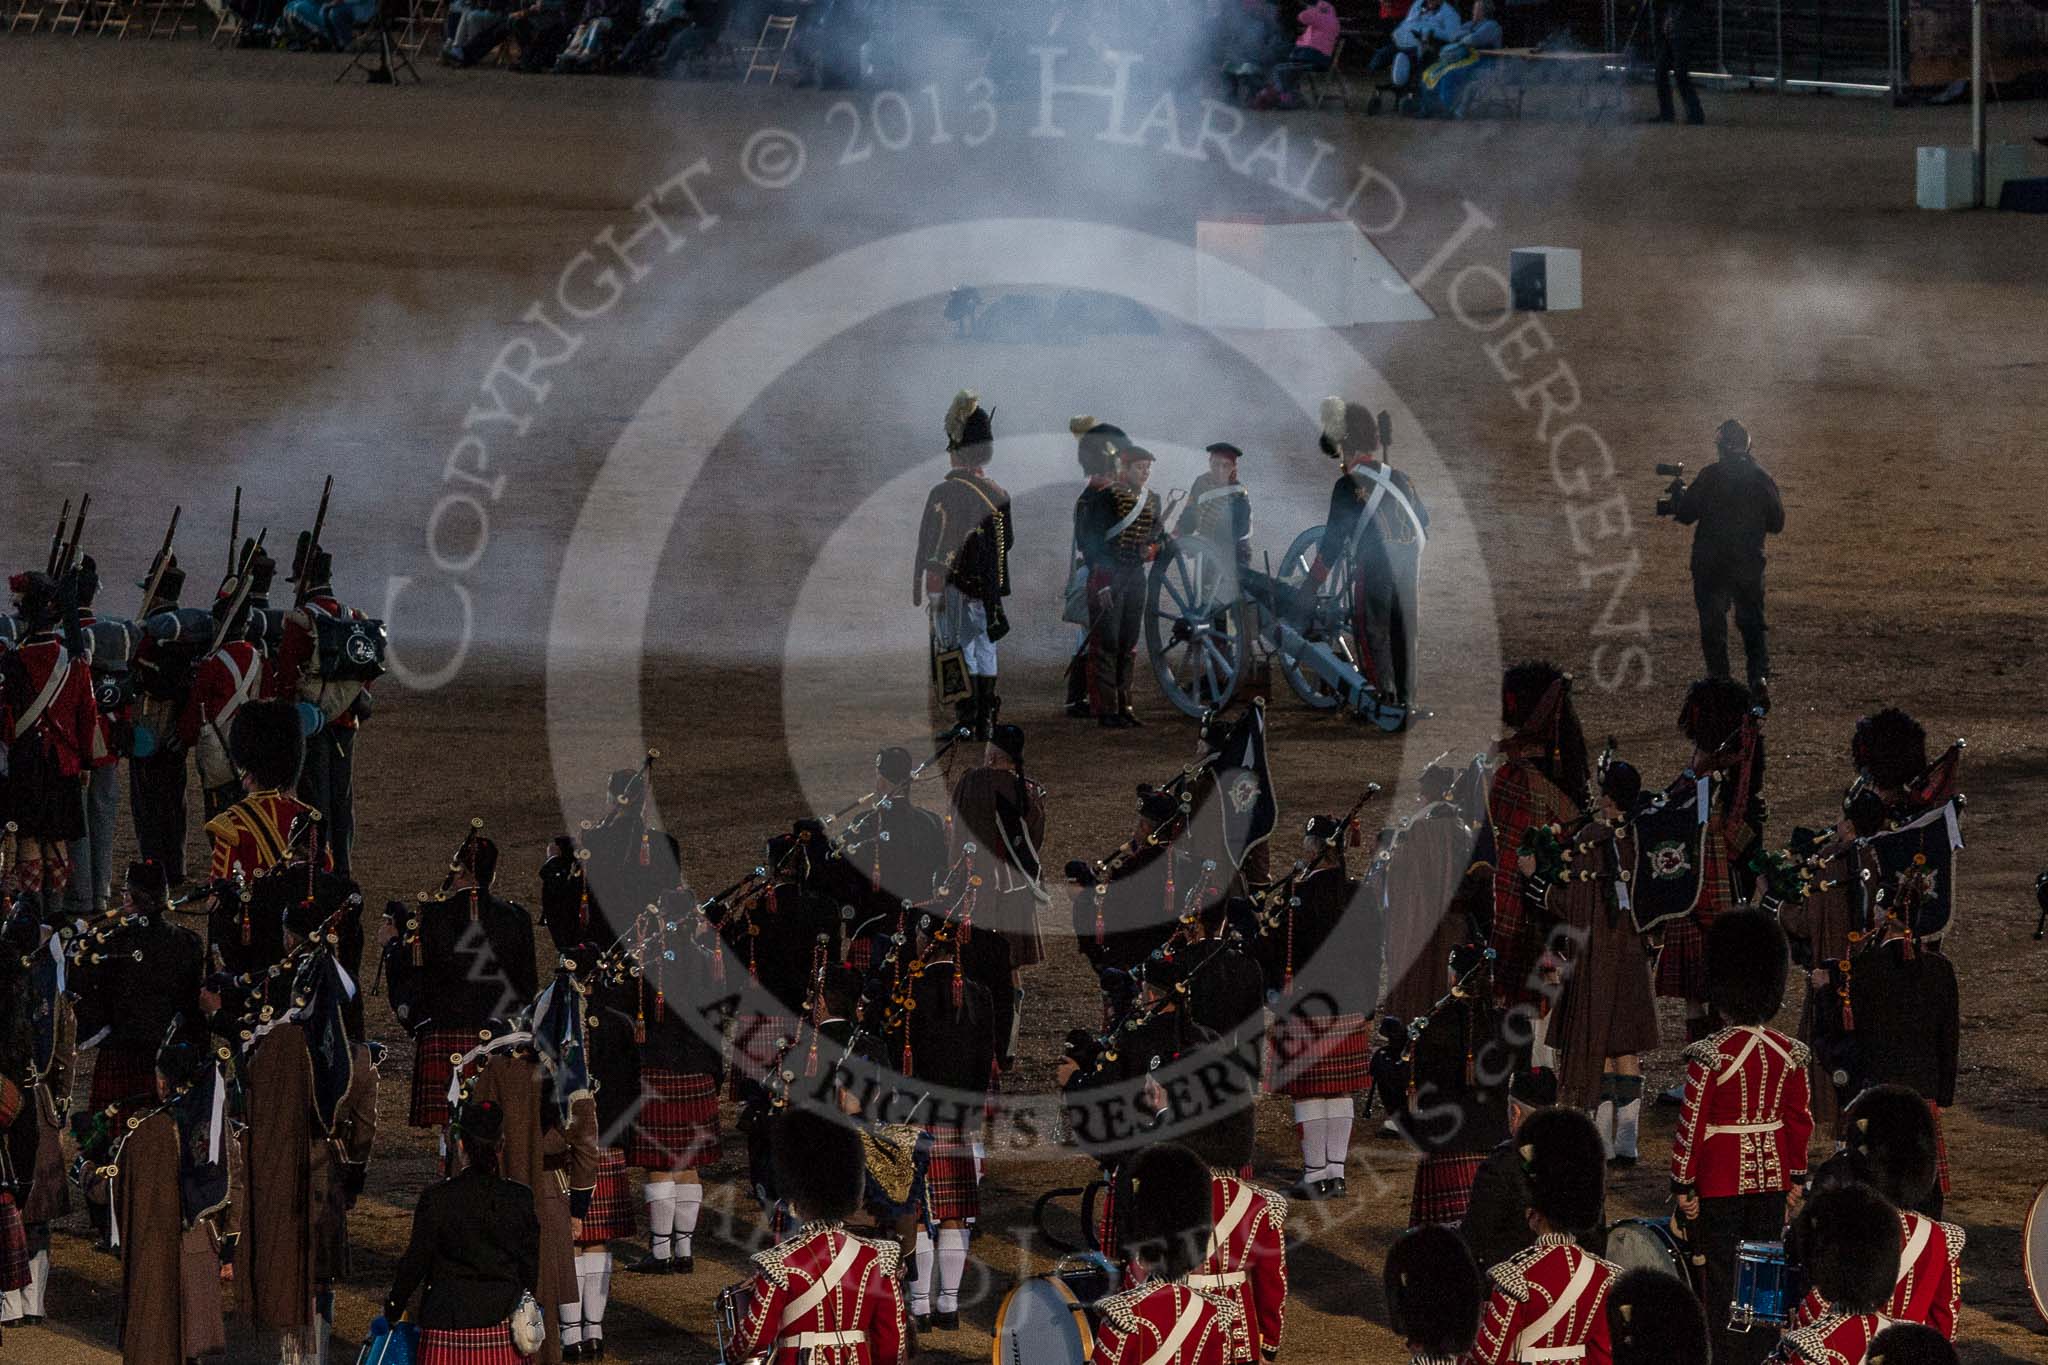 Beating Retreat 2015 - Waterloo 200.
Horse Guards Parade, Westminster,
London,

United Kingdom,
on 10 June 2015 at 21:25, image #326